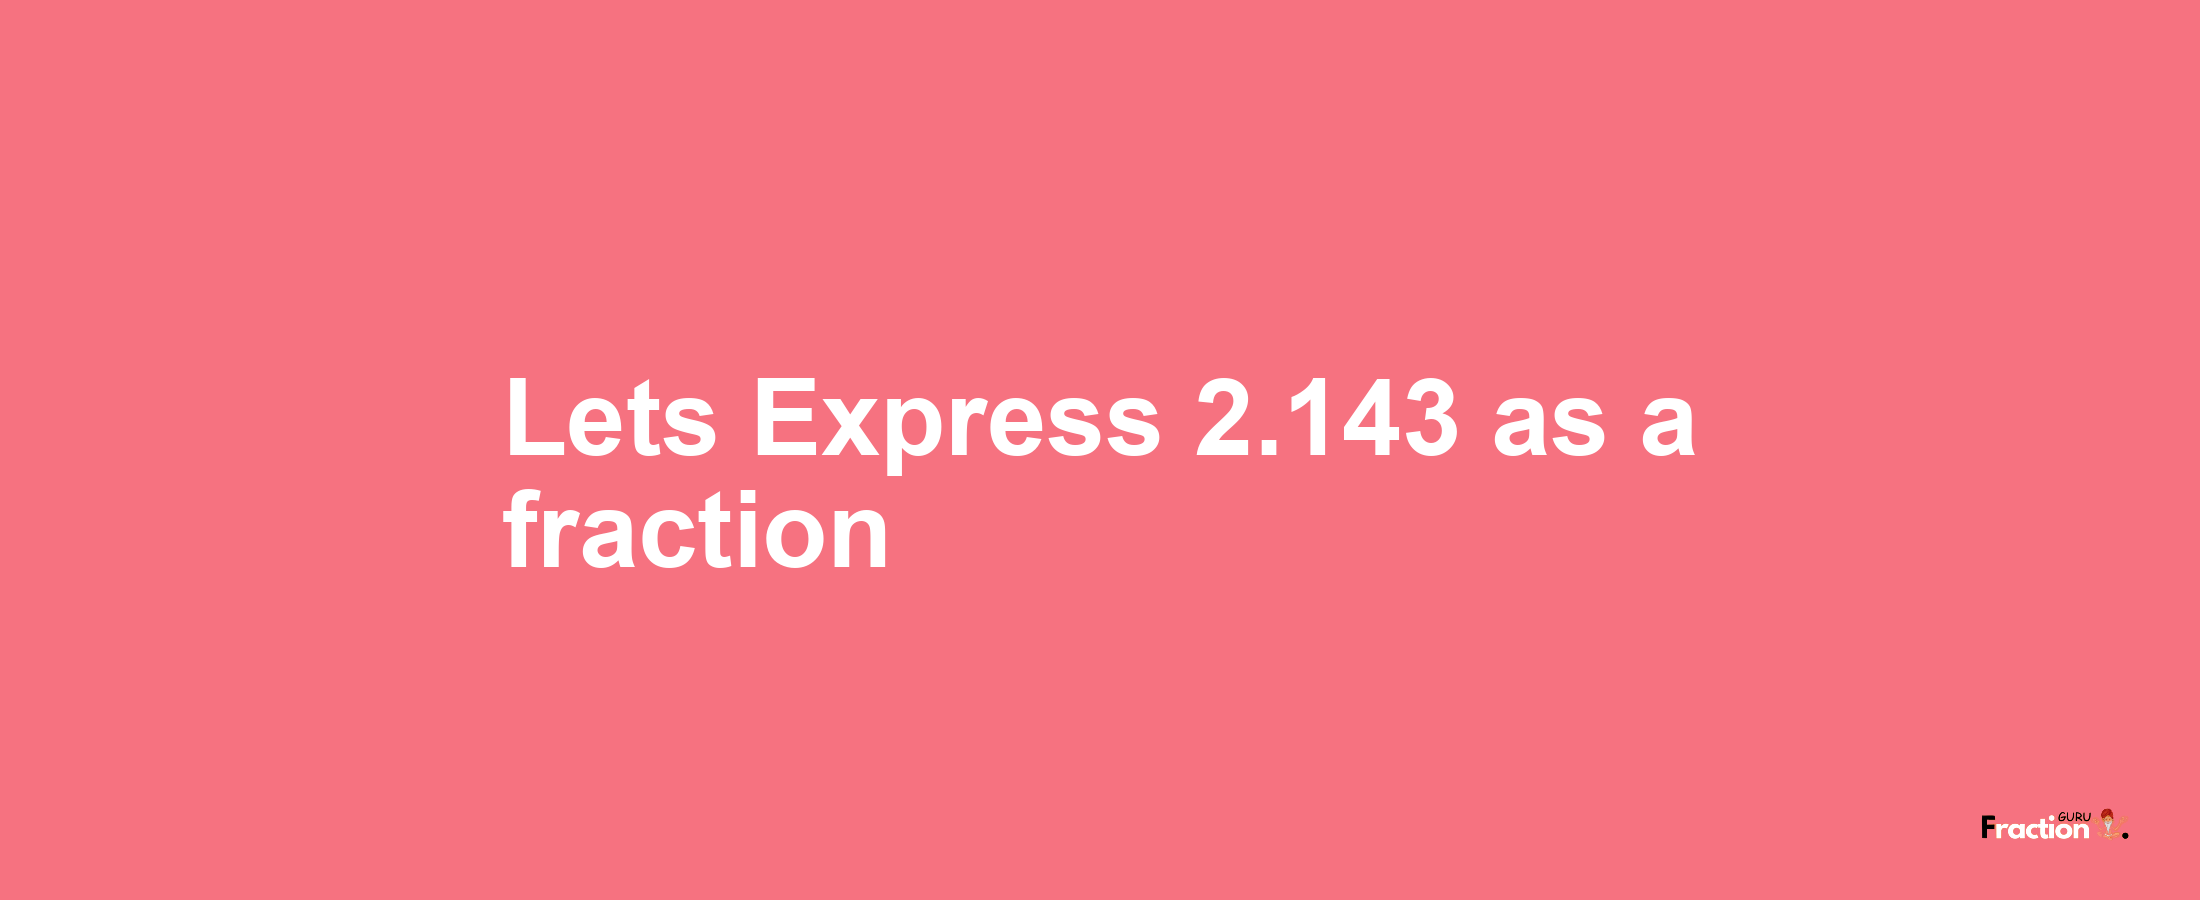 Lets Express 2.143 as afraction